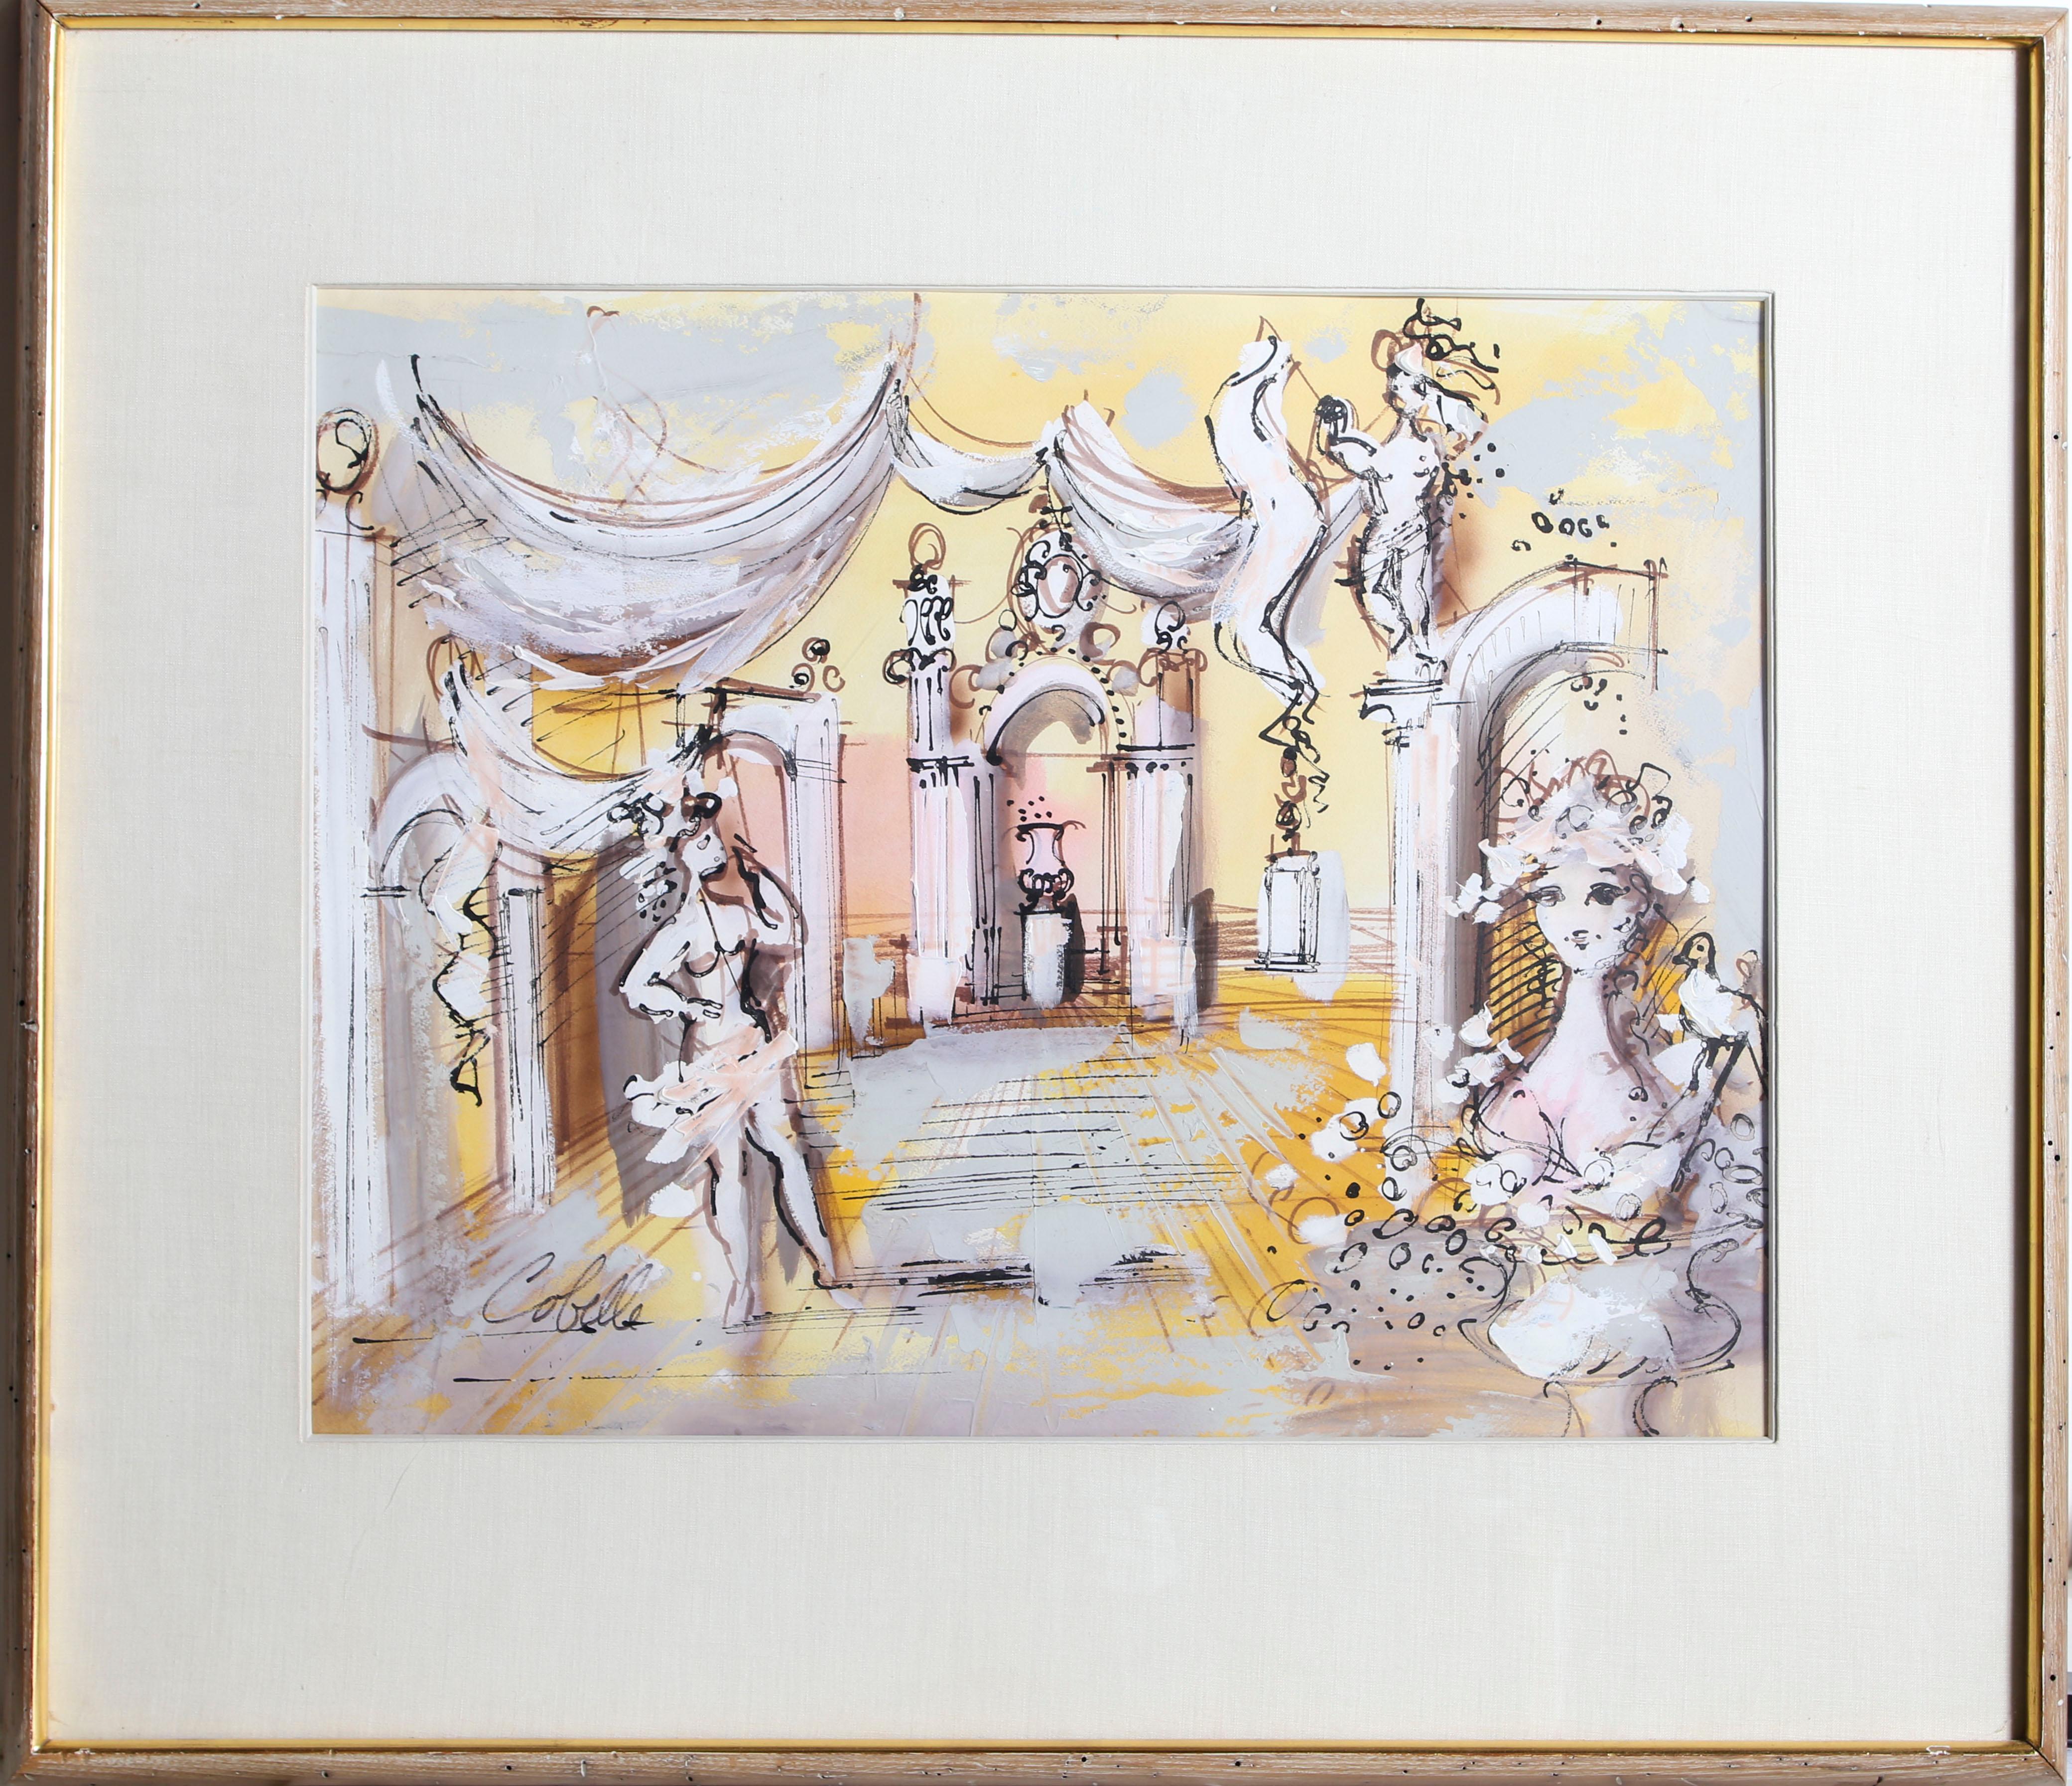 A colonnaded plaza filled with dancing figures and stone statues. Soft billowing pieces of fabric are draped over the whole scene. 

Palace
Charles Cobelle, French (1902–1994)
Date: circa 1960
Acrylic on Paper, signed lower left
Size: 20.5 x 26 in.